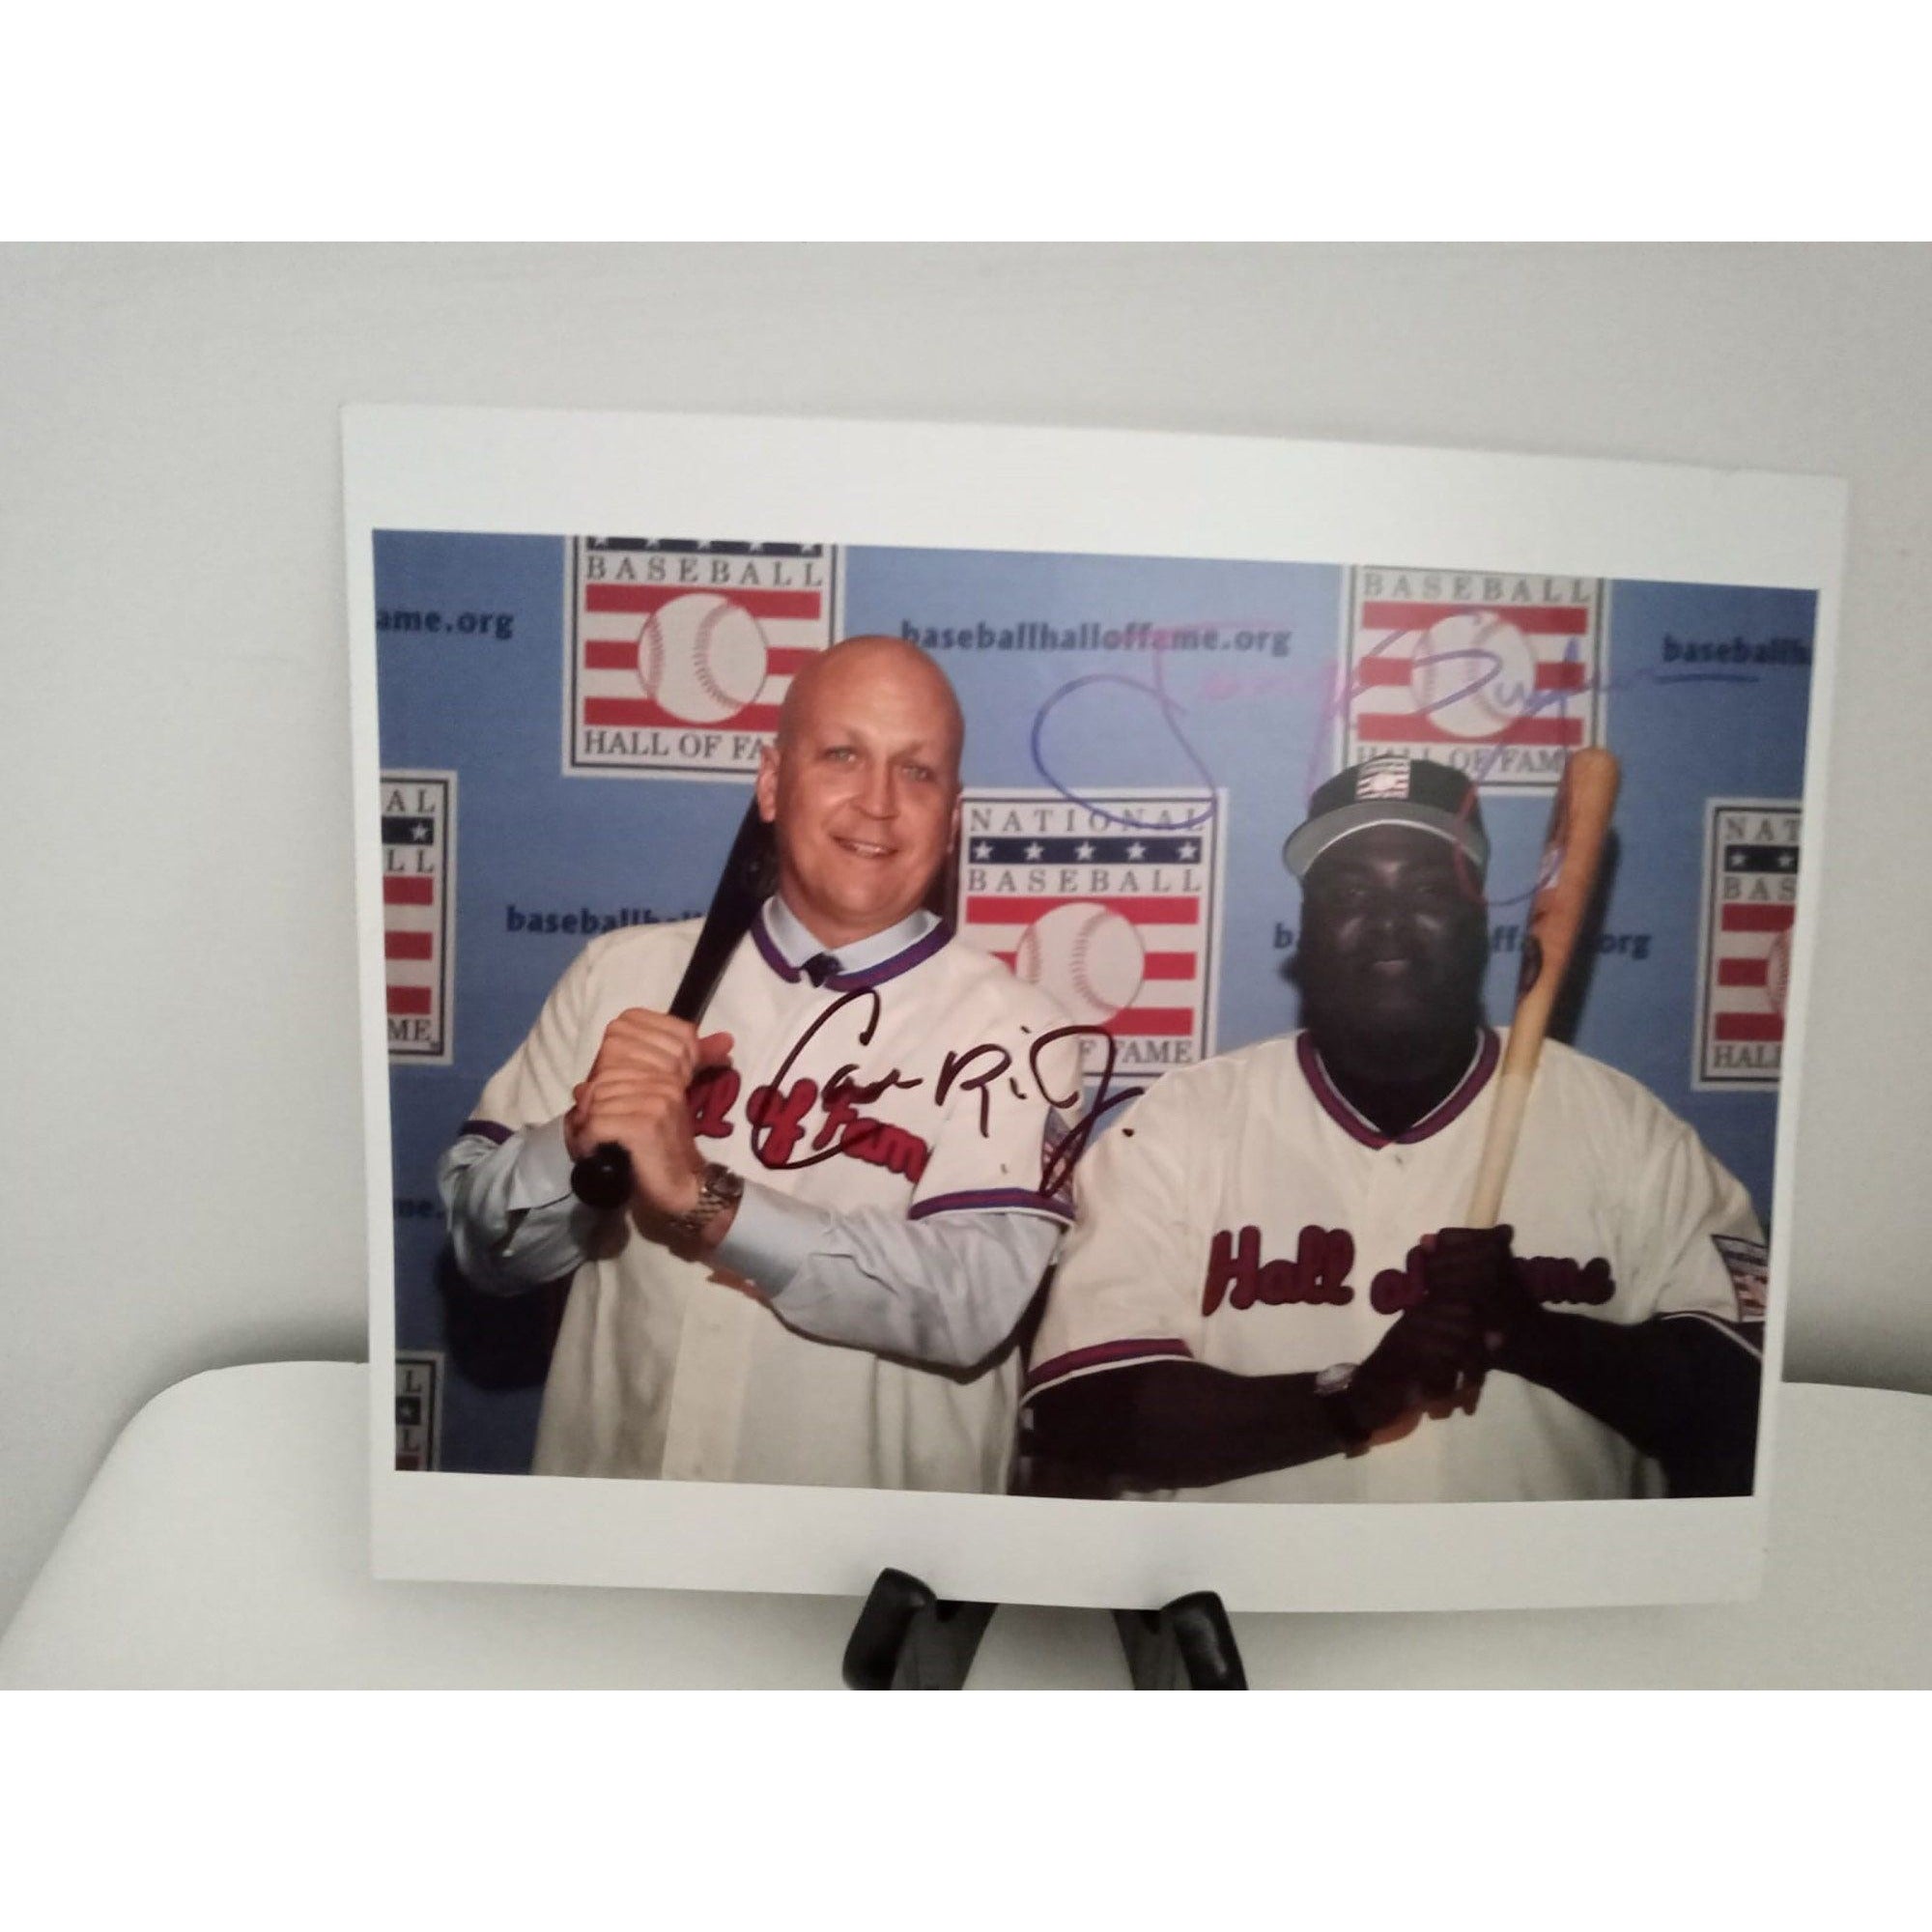 Cal Ripken Jr. And Tony Gywnn 8 by 10 signed photo with proof